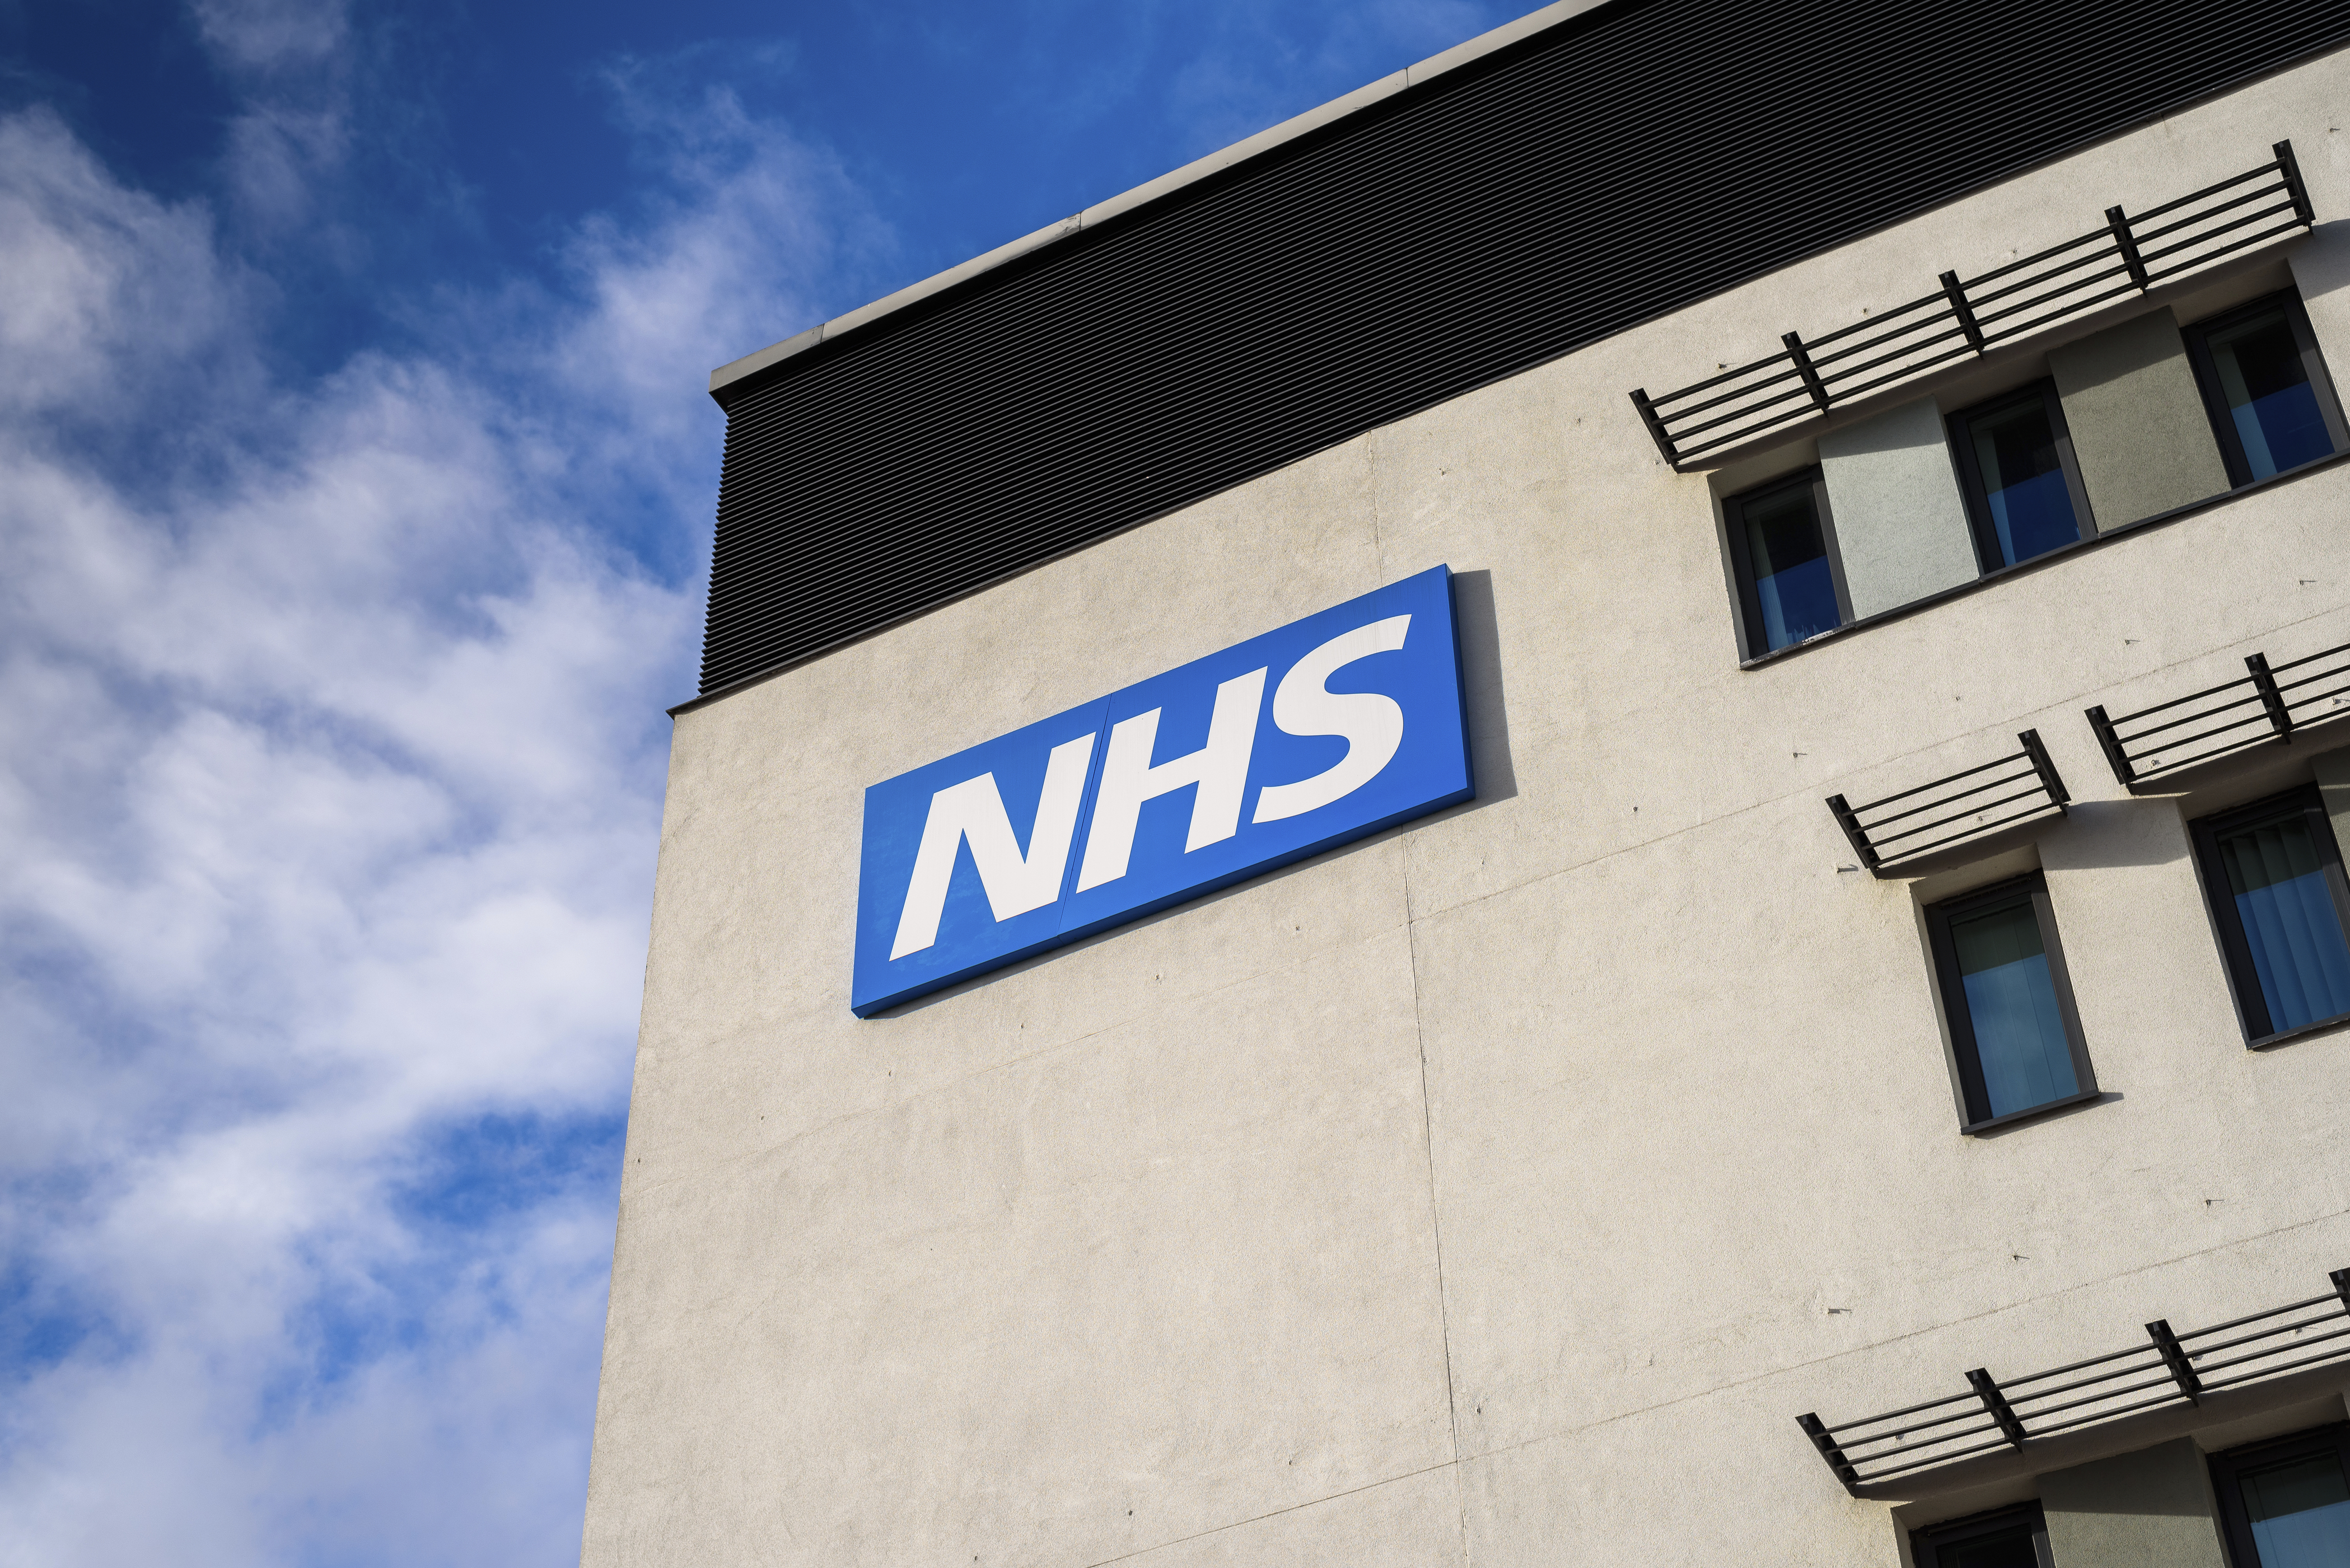 NHS and  heath care security solutions